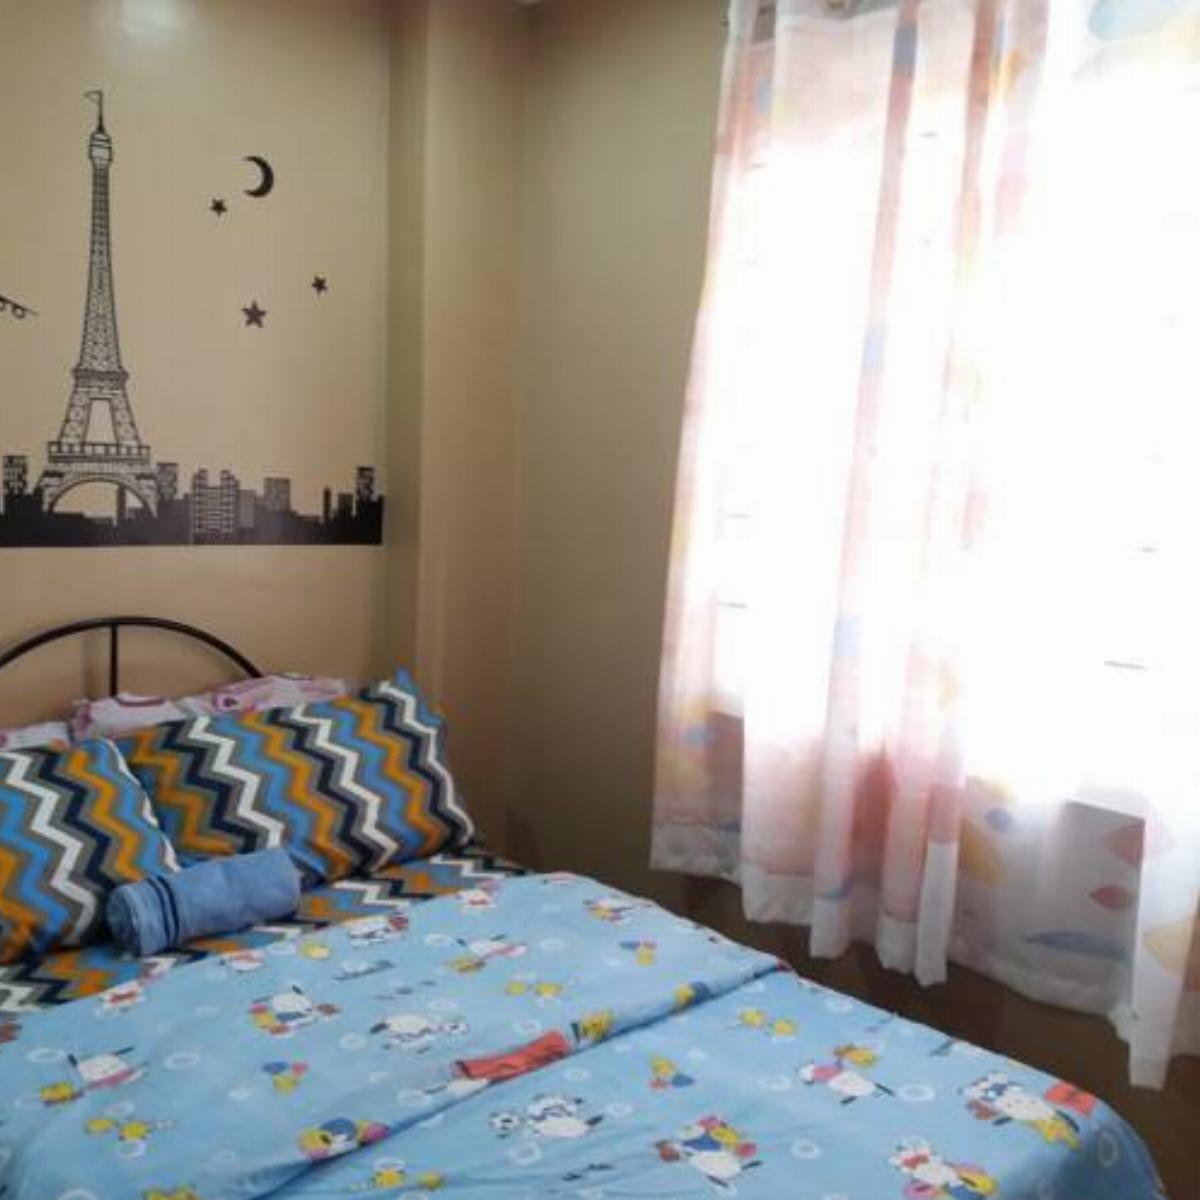 Baguio Condo Suite for Transient by Cuaresma Hotel Baguio Philippines